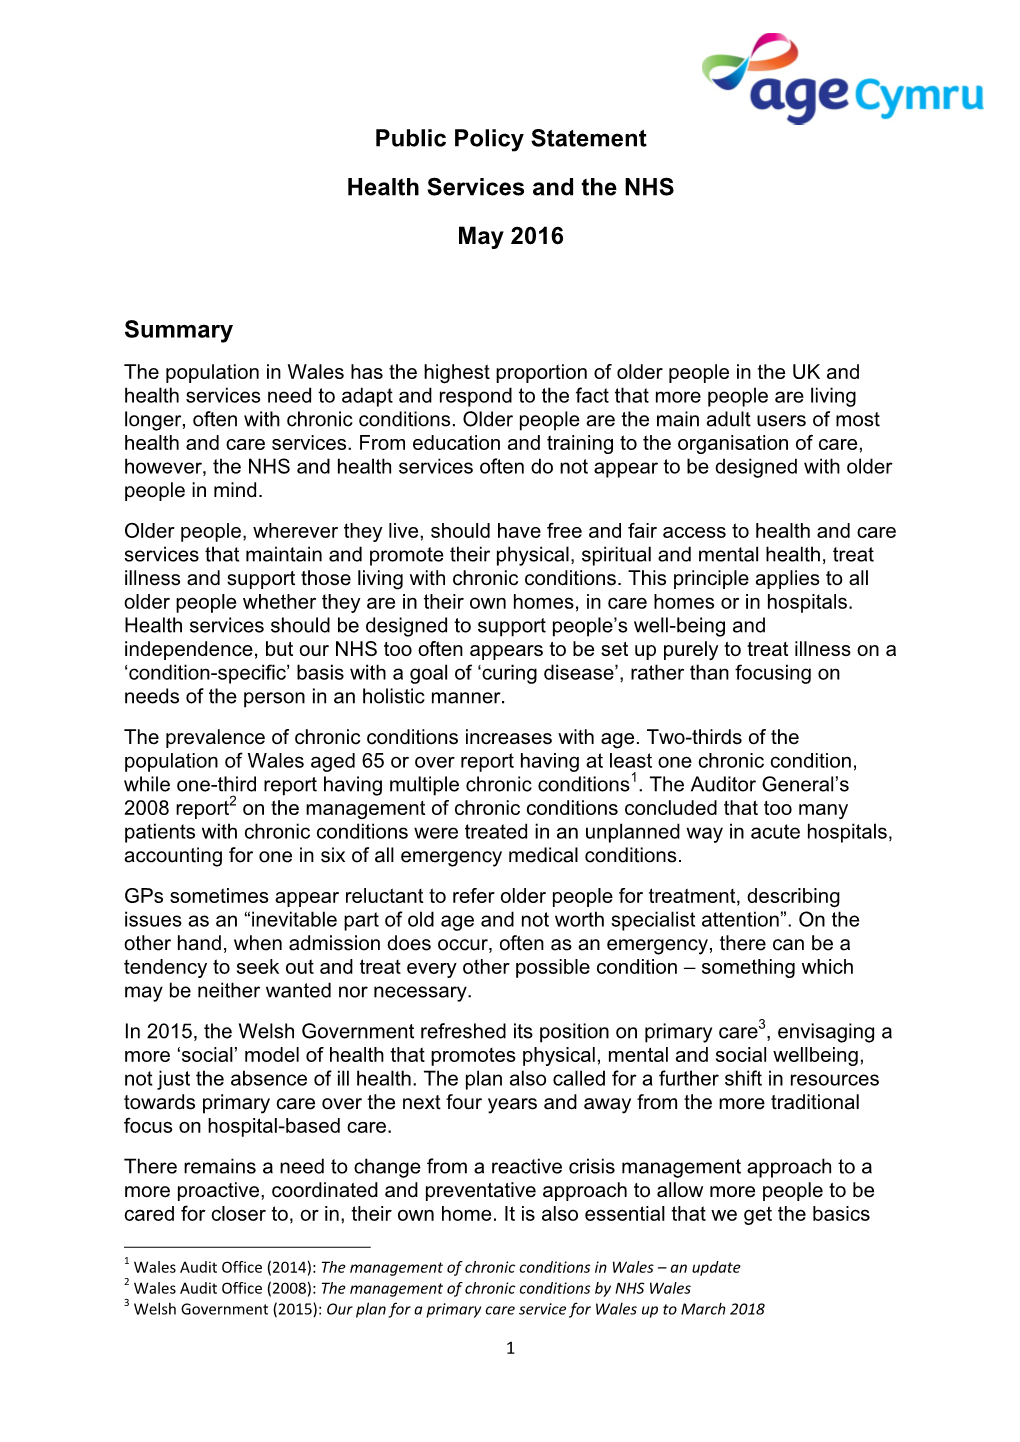 Public Policy Statement Health Services and the NHS May 2016